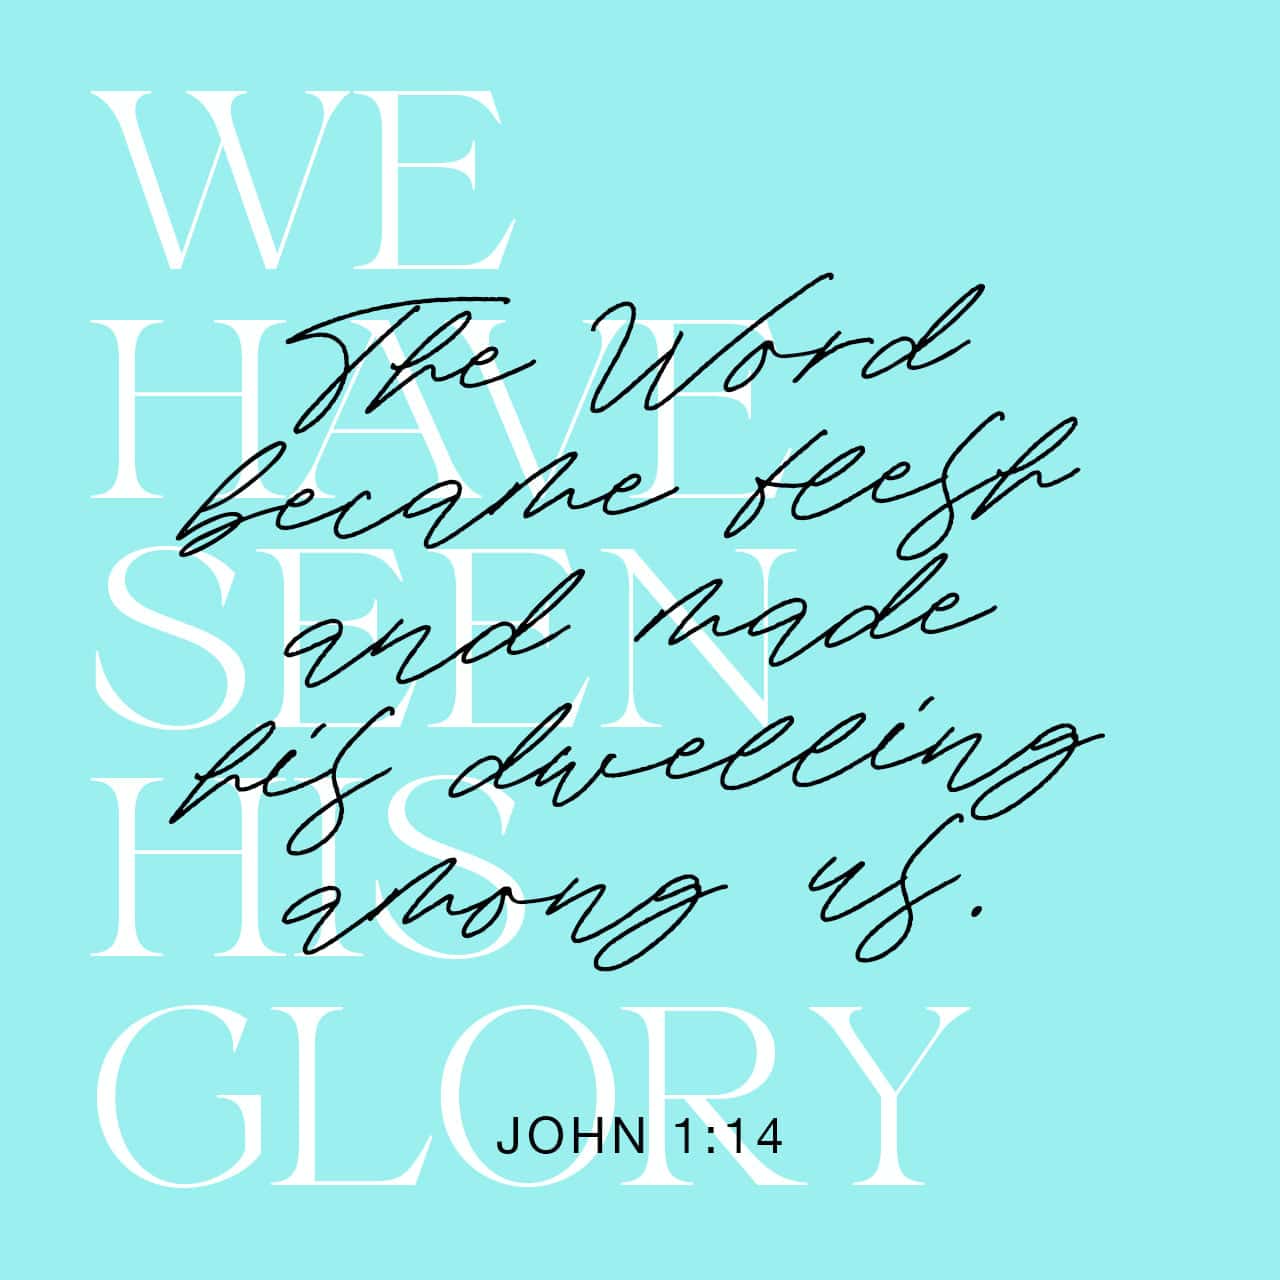 John 1:14 And the Word was made flesh, and dwelt among us, (and we beheld his glory, the glory as of the only begotten of the Father,) full of grace and truth. | King James Version (KJV) | Download The Bible App Now